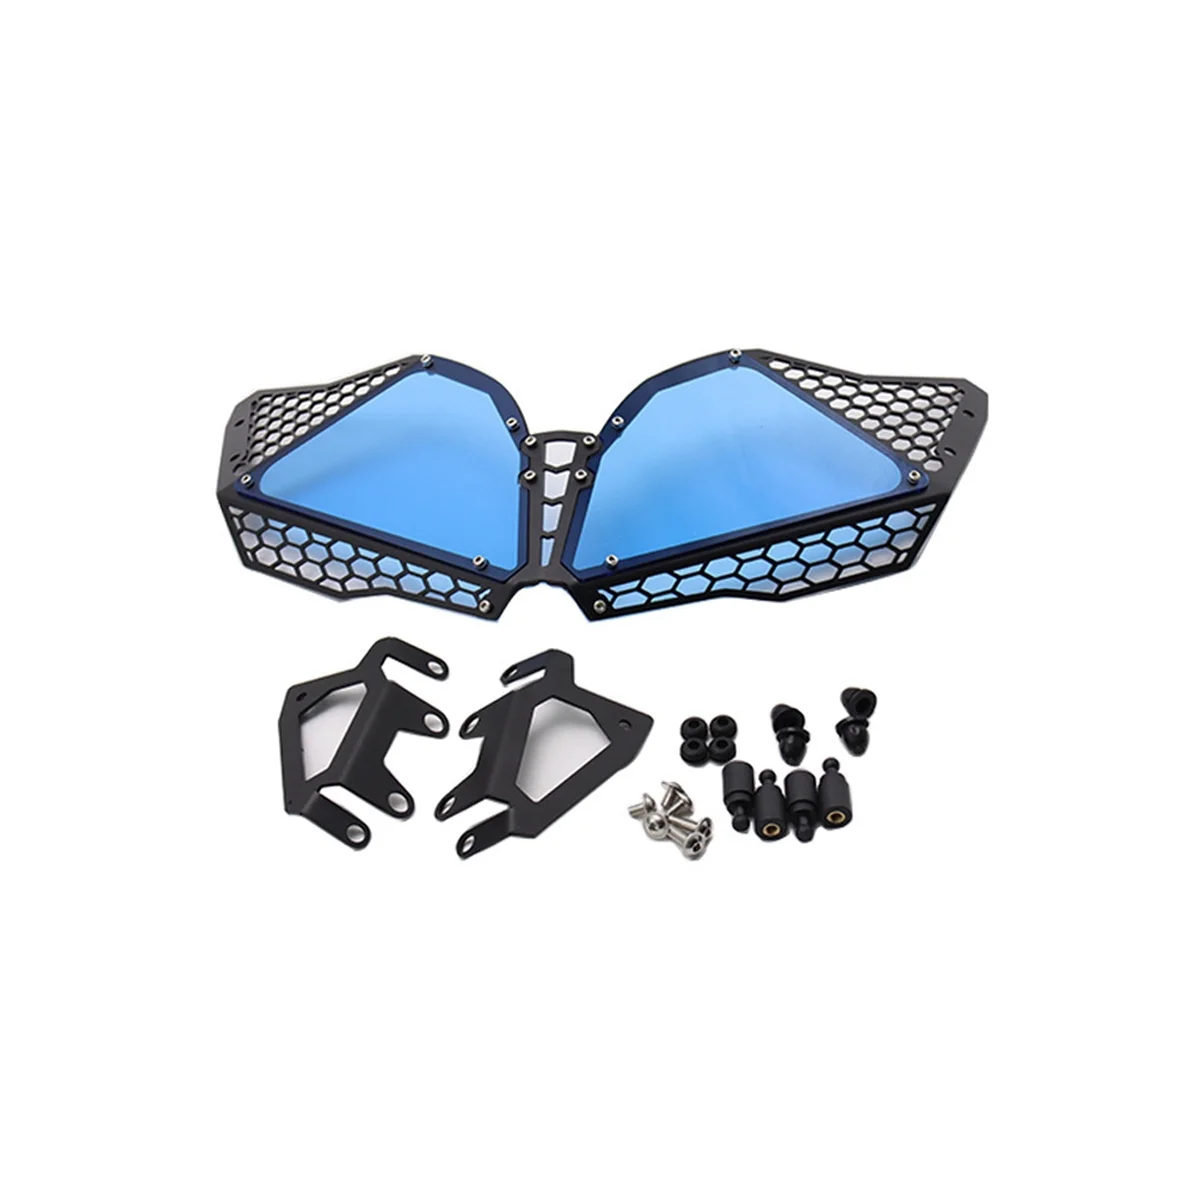 suitable-for-dl650-12-16-motorbike-cnc-modified-grille-headlight-cover-trim-cover-blue